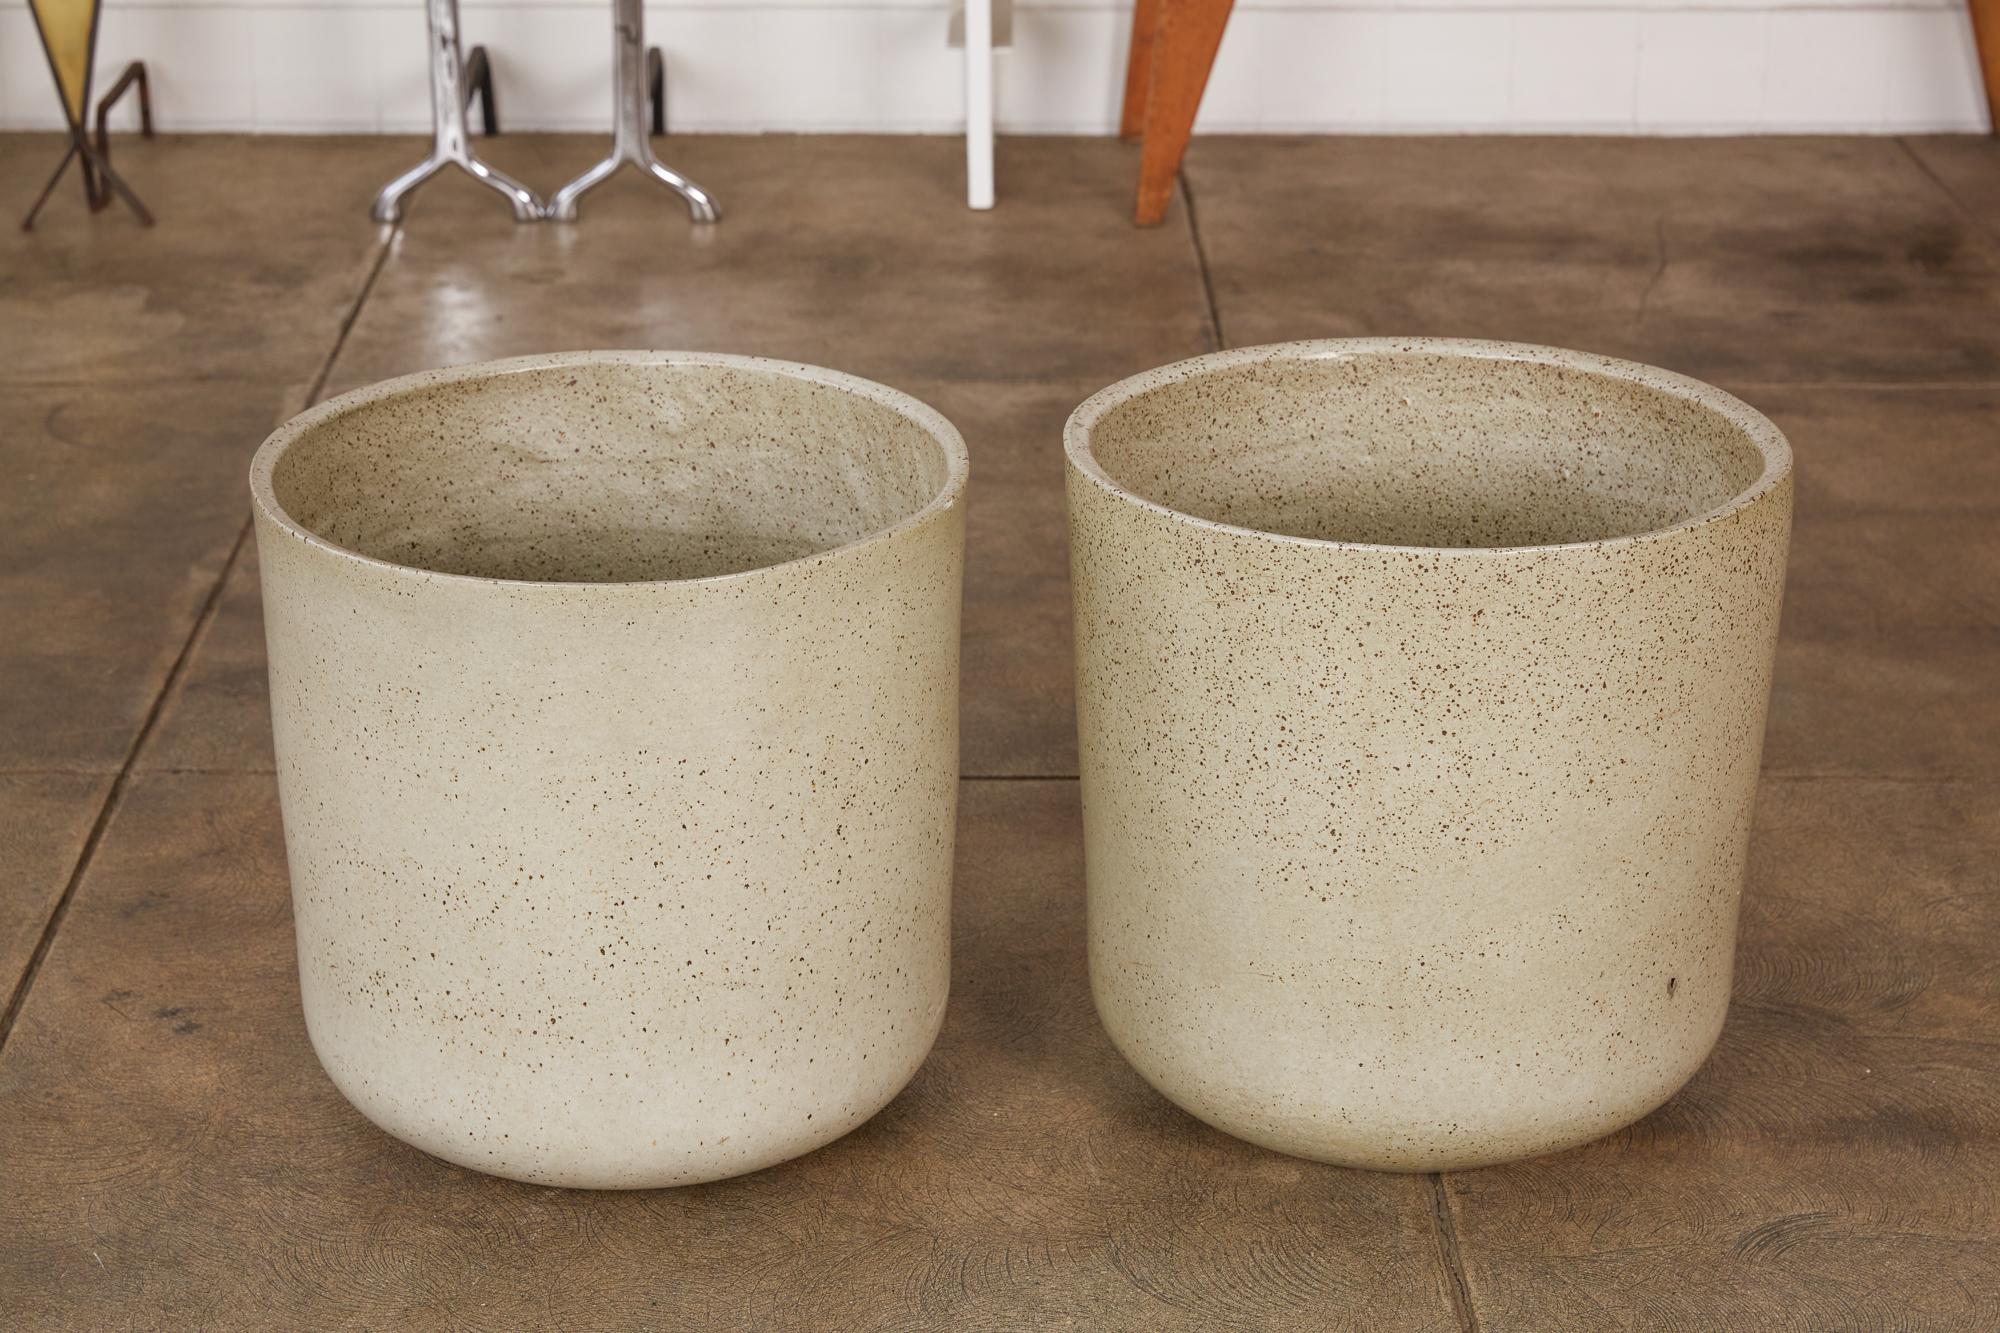 A pair of Malcolm Leland’s model LT-15 tall planters for Architectural Pottery. The pots feature a slightly flared cylindrical shape and a curved bottom, that is covered in a minimalist speckled glaze.

Dimensions: 17” diameter x 16.5”